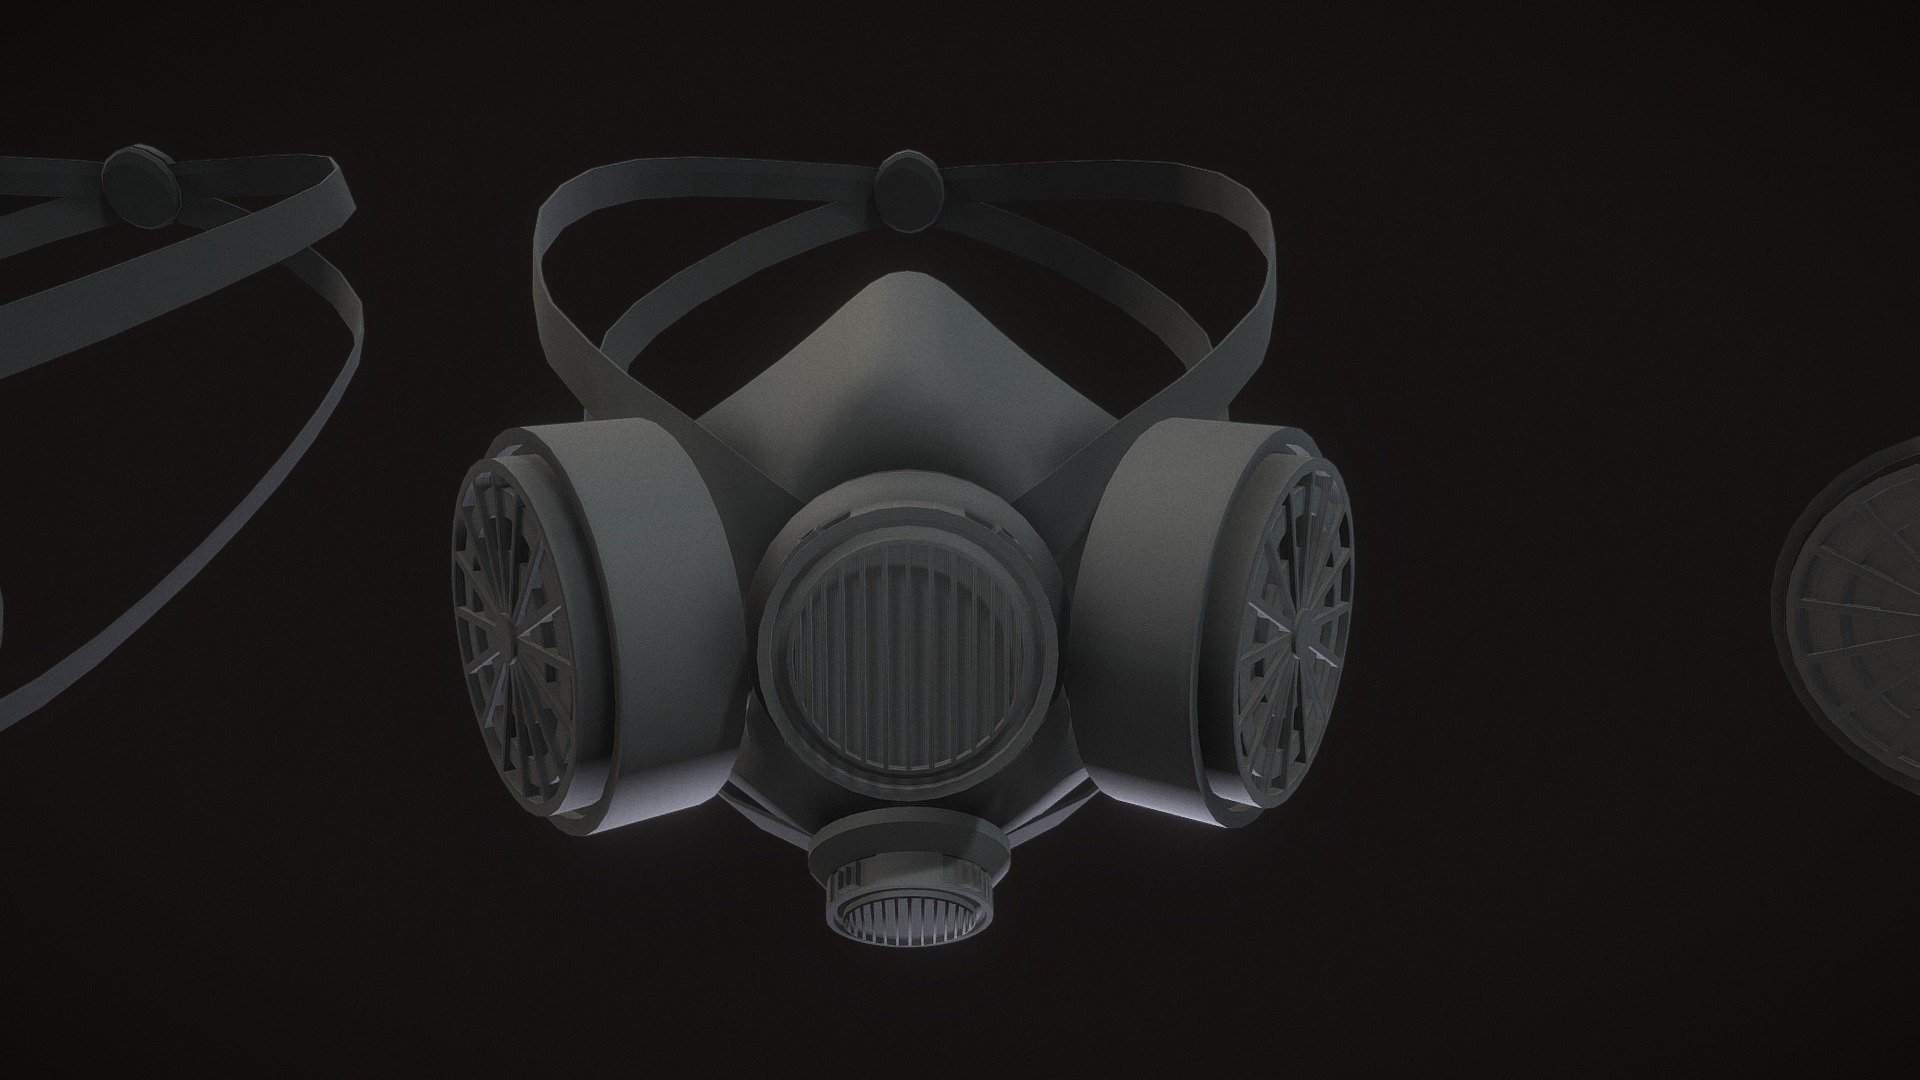 A Gas Mask with 4 Variations. One mask without holes on the inside and one with holes. Each have a strap variation. The mask is low-poly and has a basic UV. 
The zip folder contains fbx, obj, stl and the original blend file as well as the individual masks 3d model